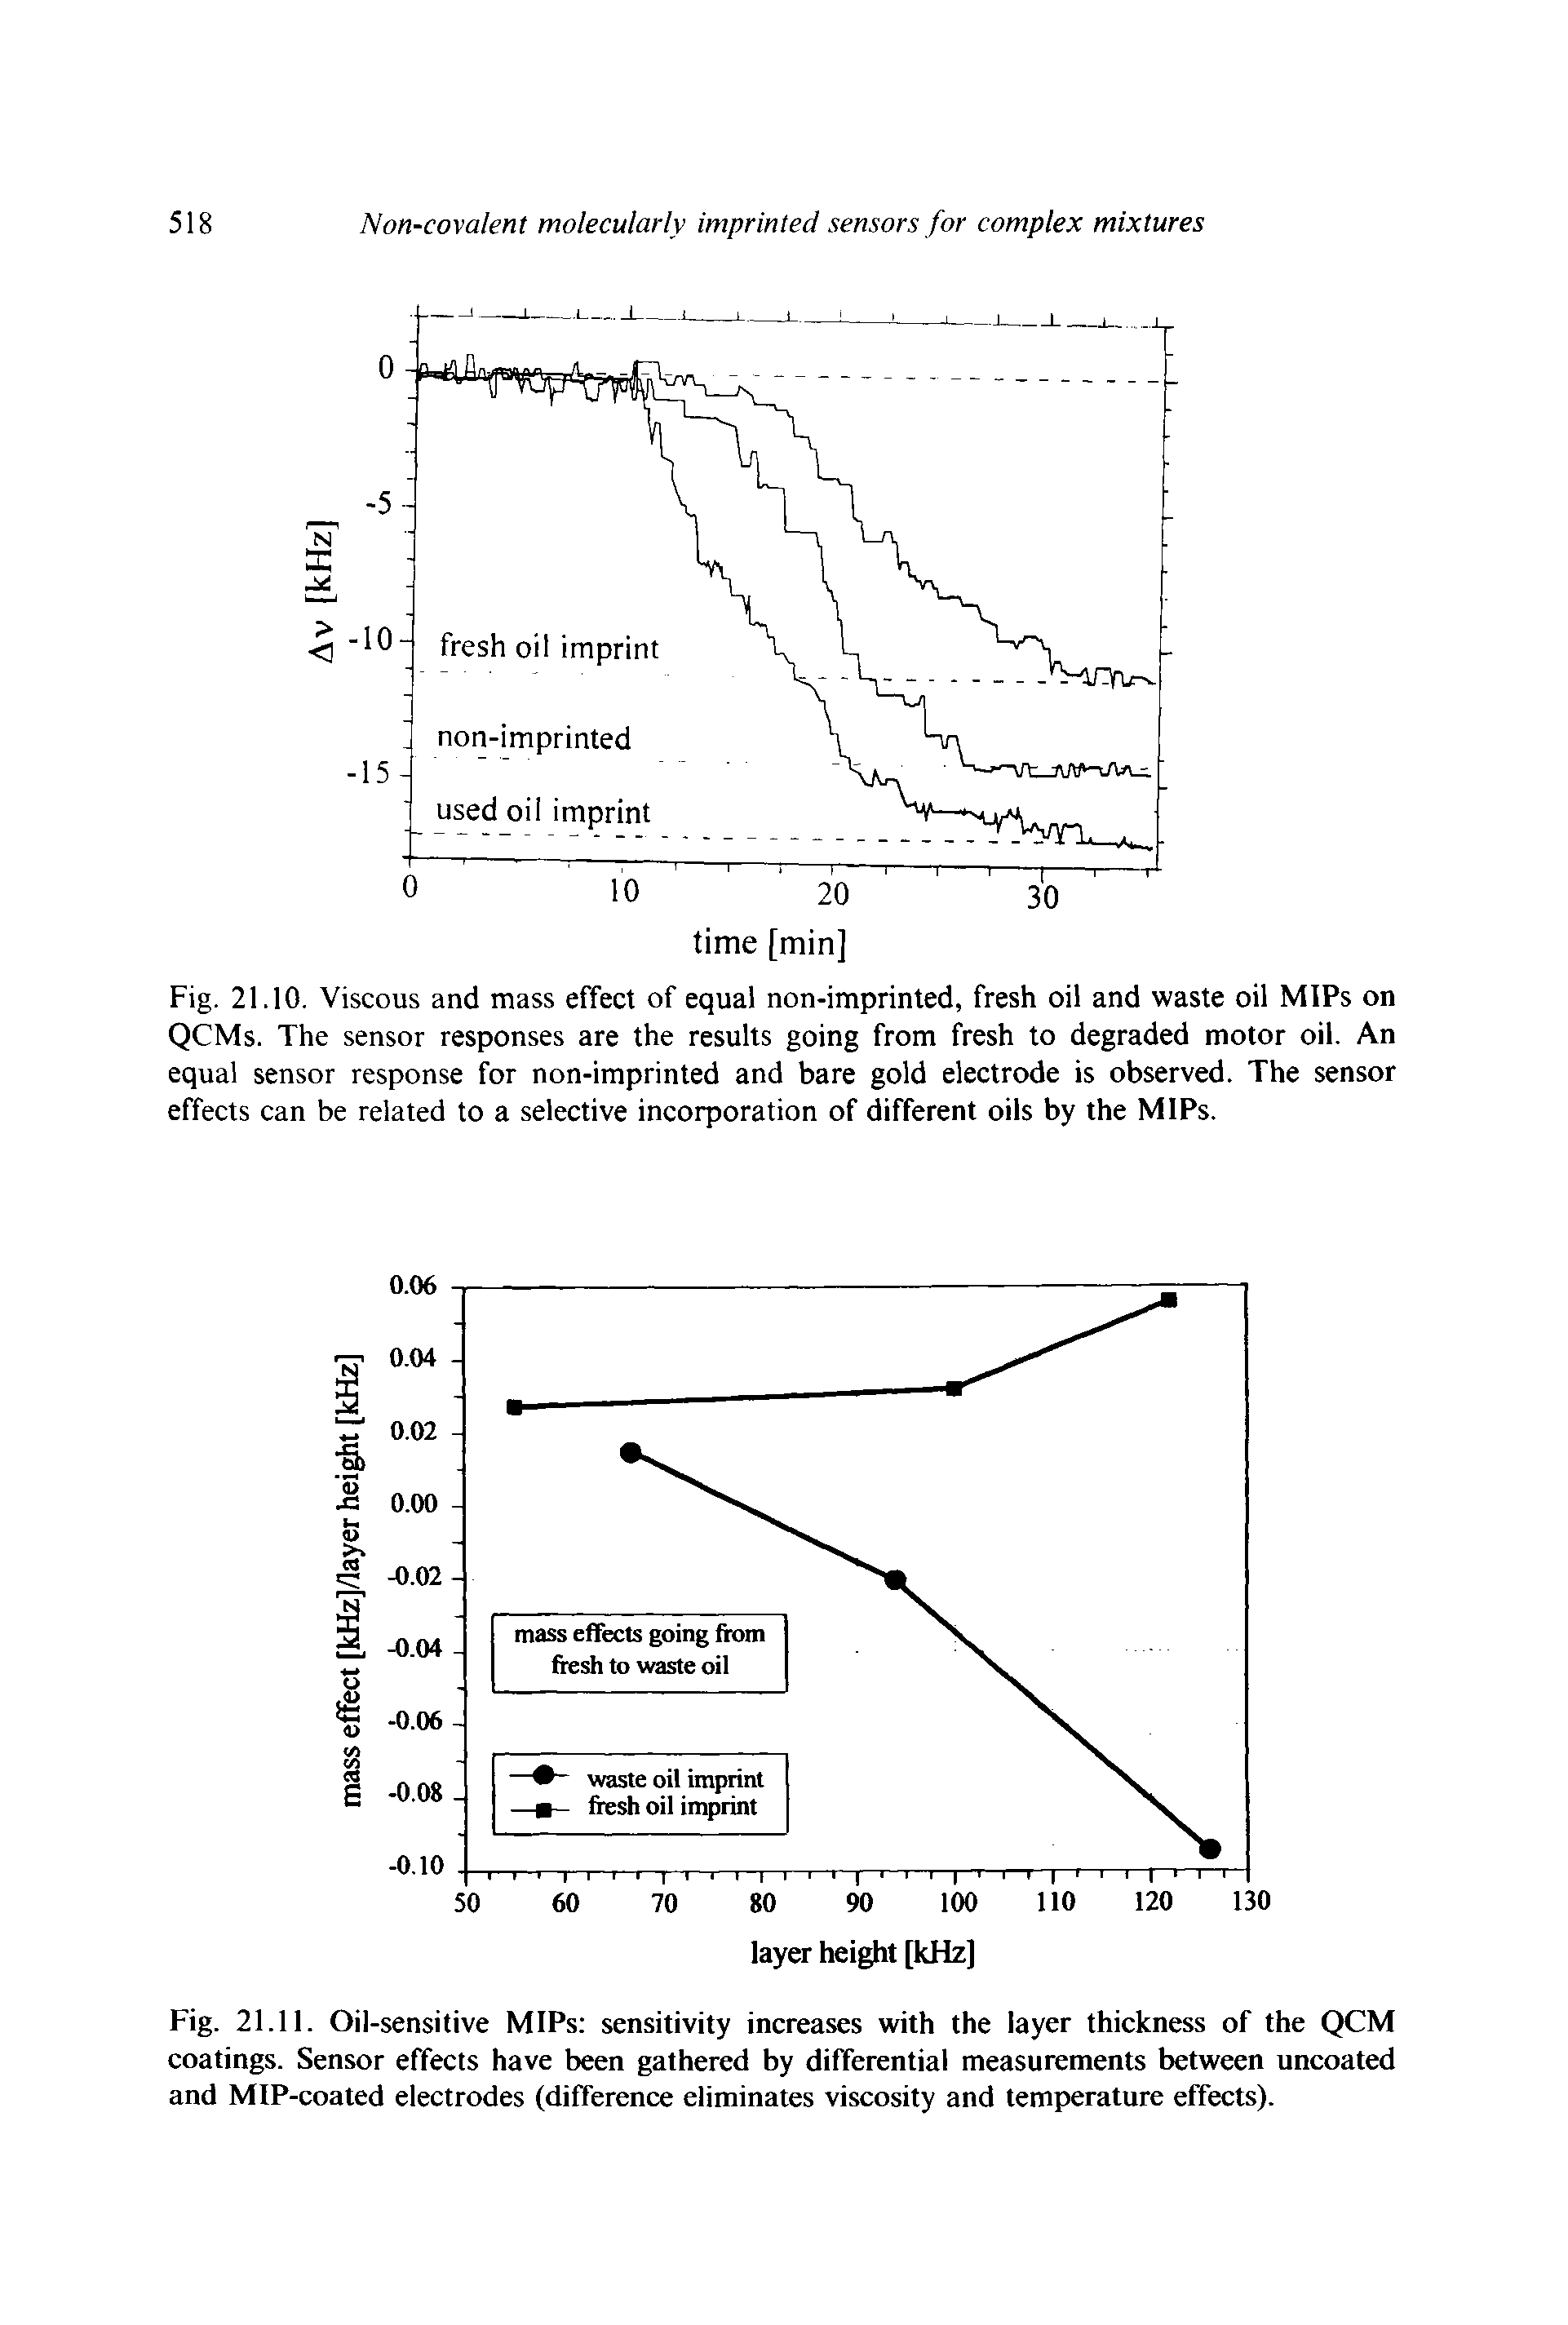 Fig. 21.11. Oil-sensitive MIPs sensitivity increases with the layer thickness of the QCM coatings. Sensor effects have been gathered by differential measurements between uncoated and MIP-coated electrodes (difference eliminates viscosity and temperature effects).